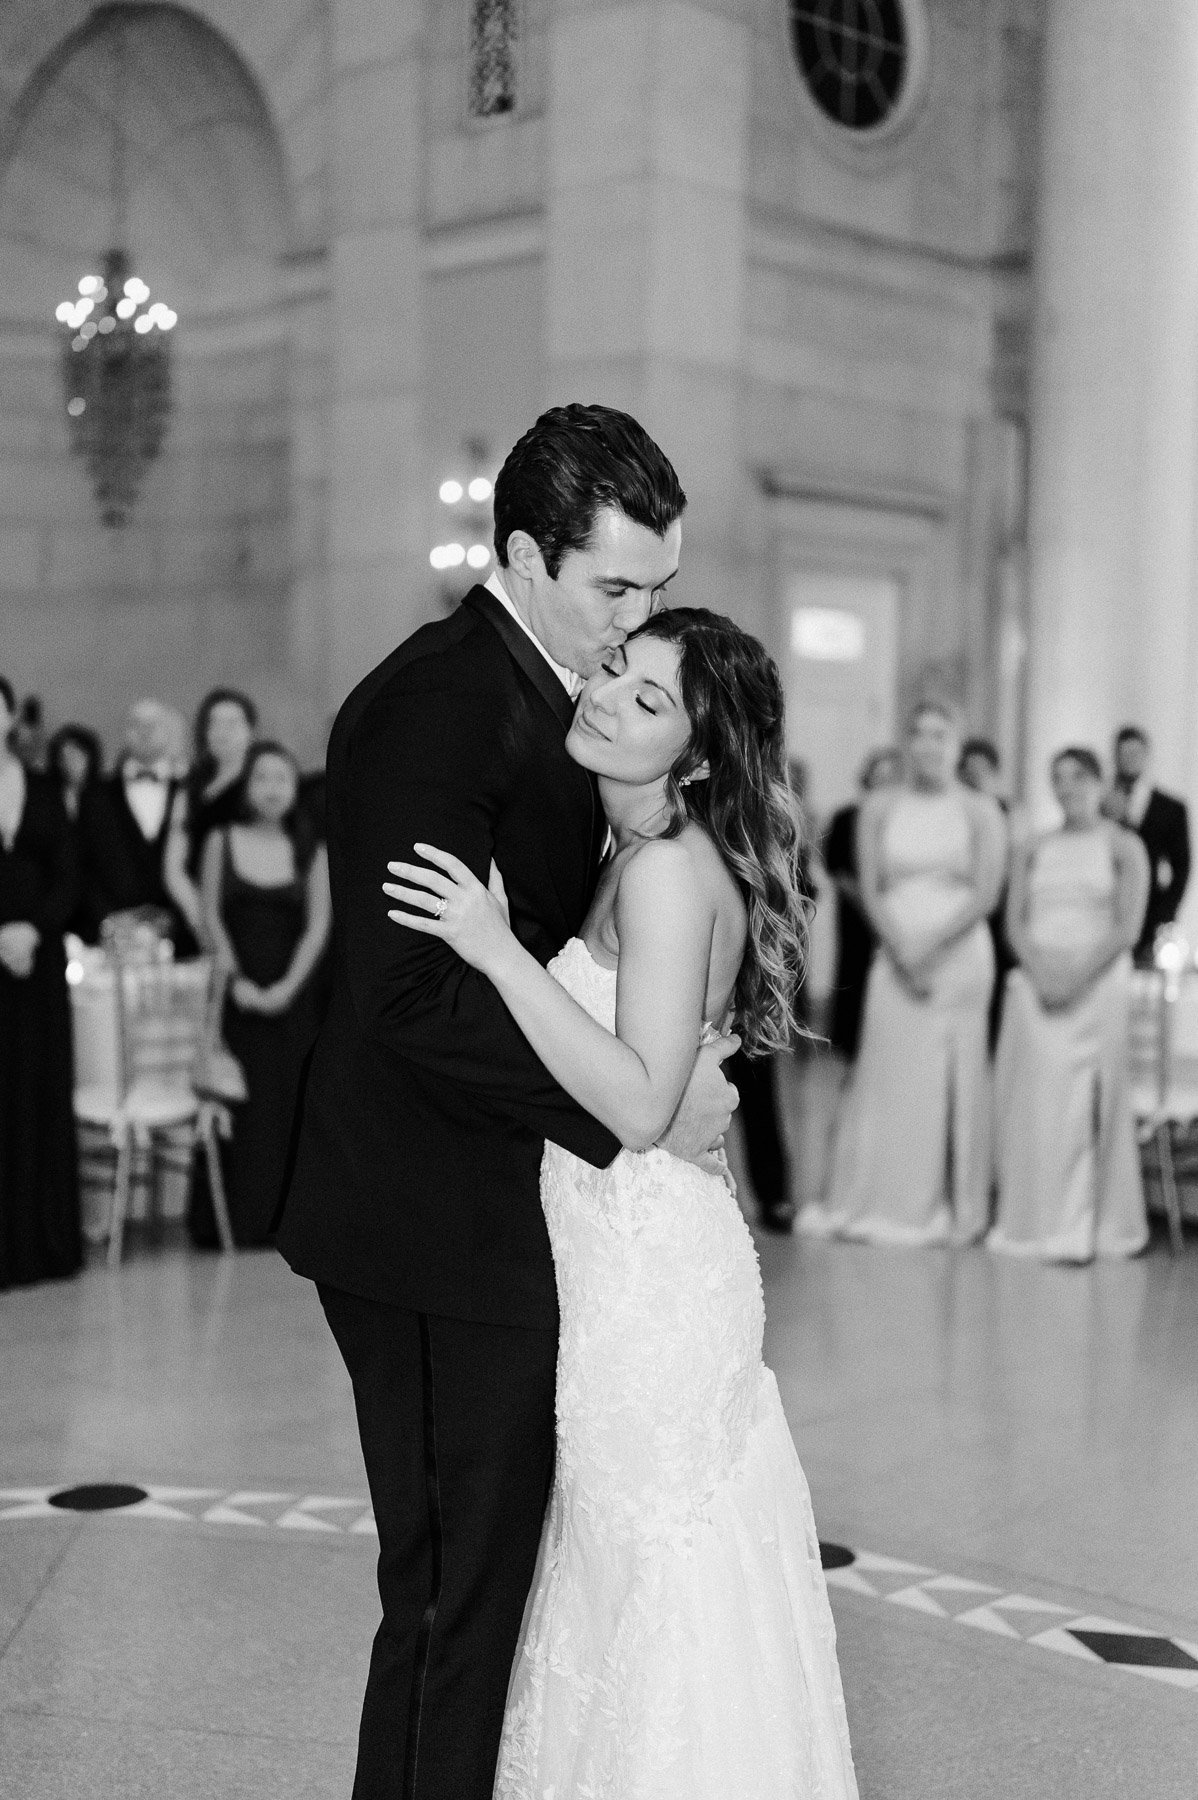 Hall of Springs Saratoga NY Winter Wedding by Michelle Lange Photography-79.jpg